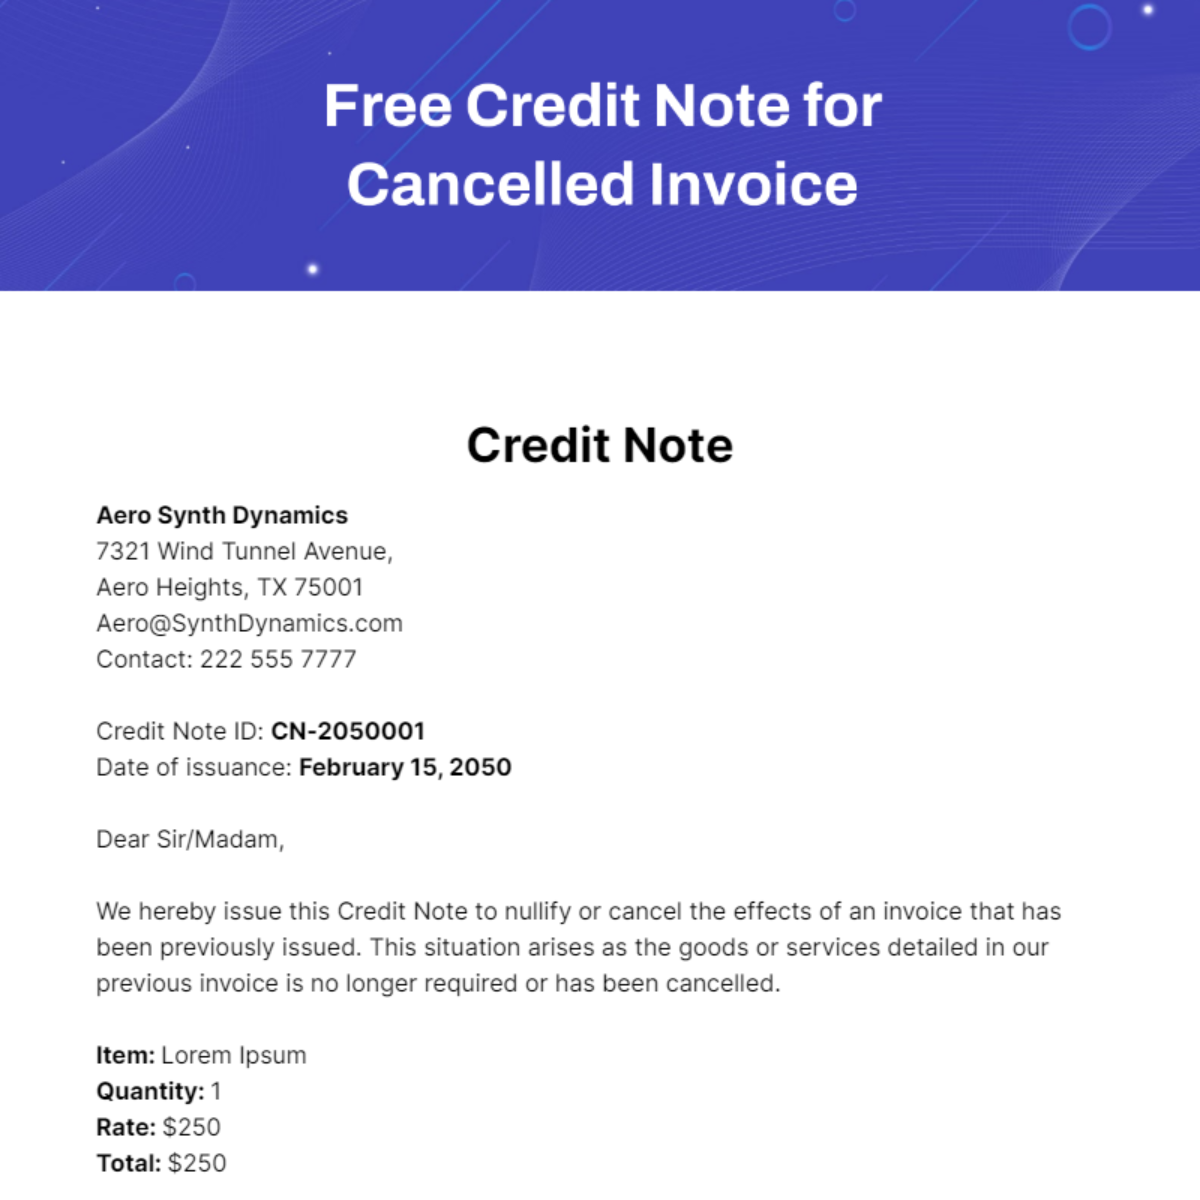 Free Credit Note for Cancelled Invoice Template